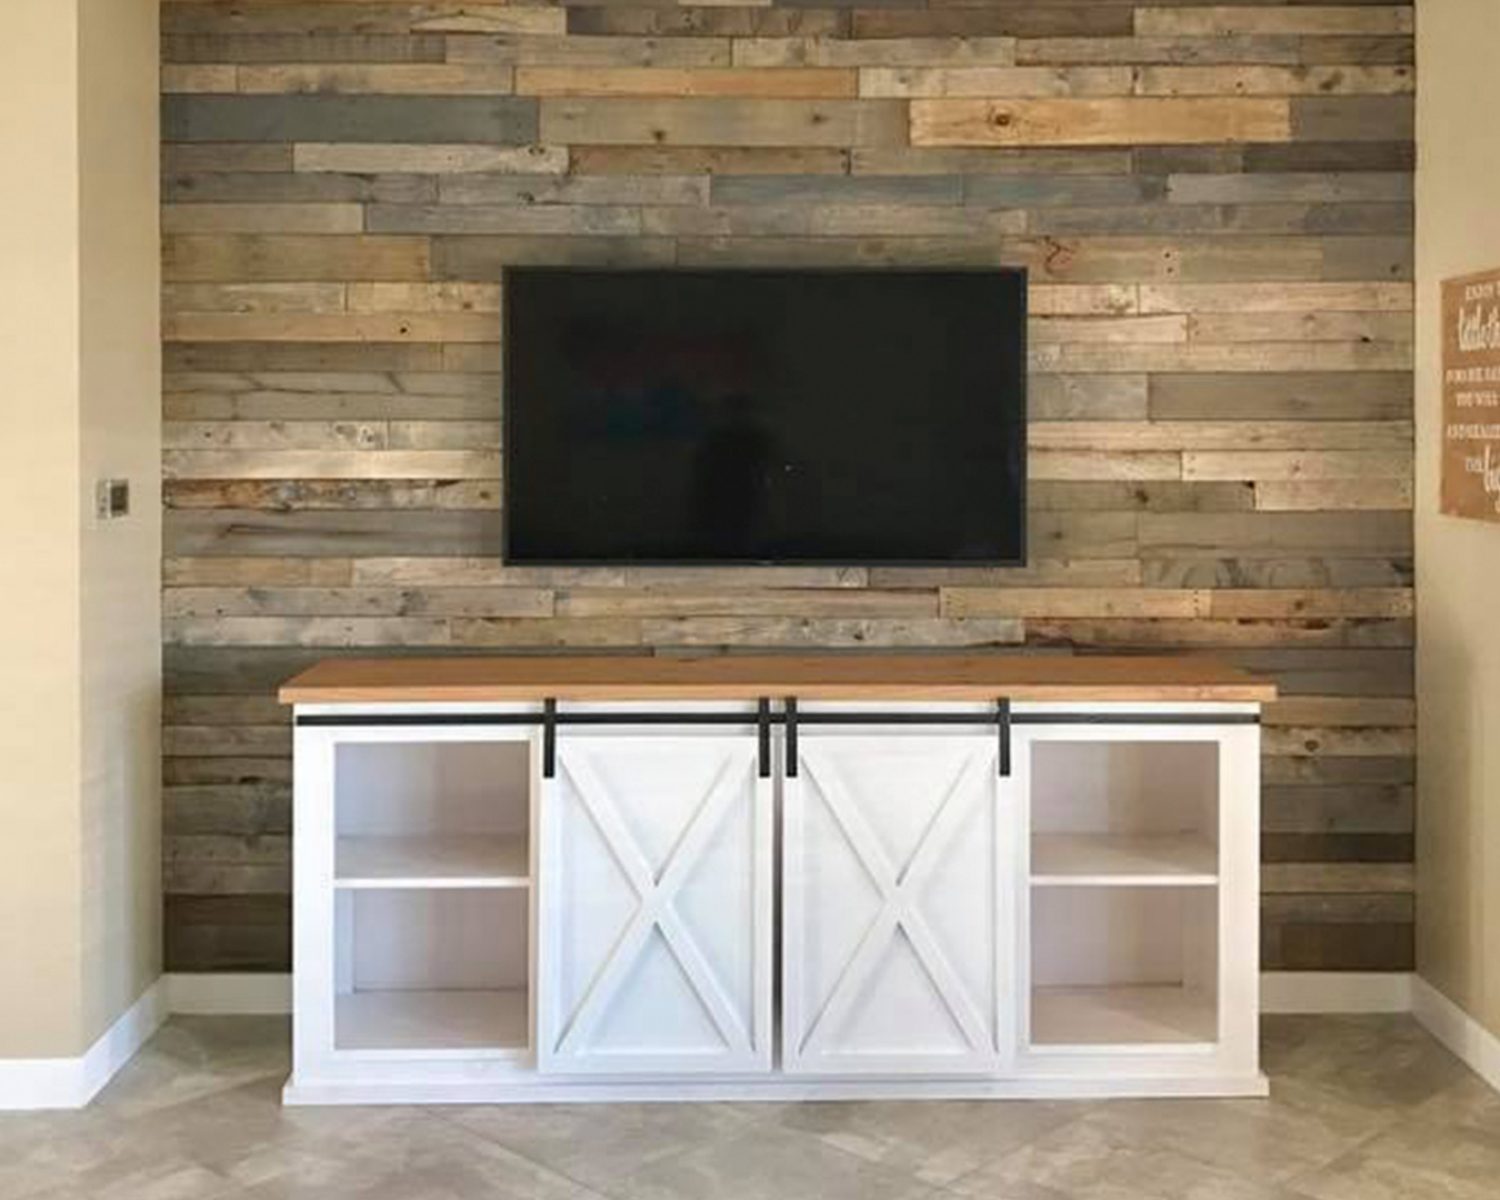 TV Mounting Services in Palm Beach County